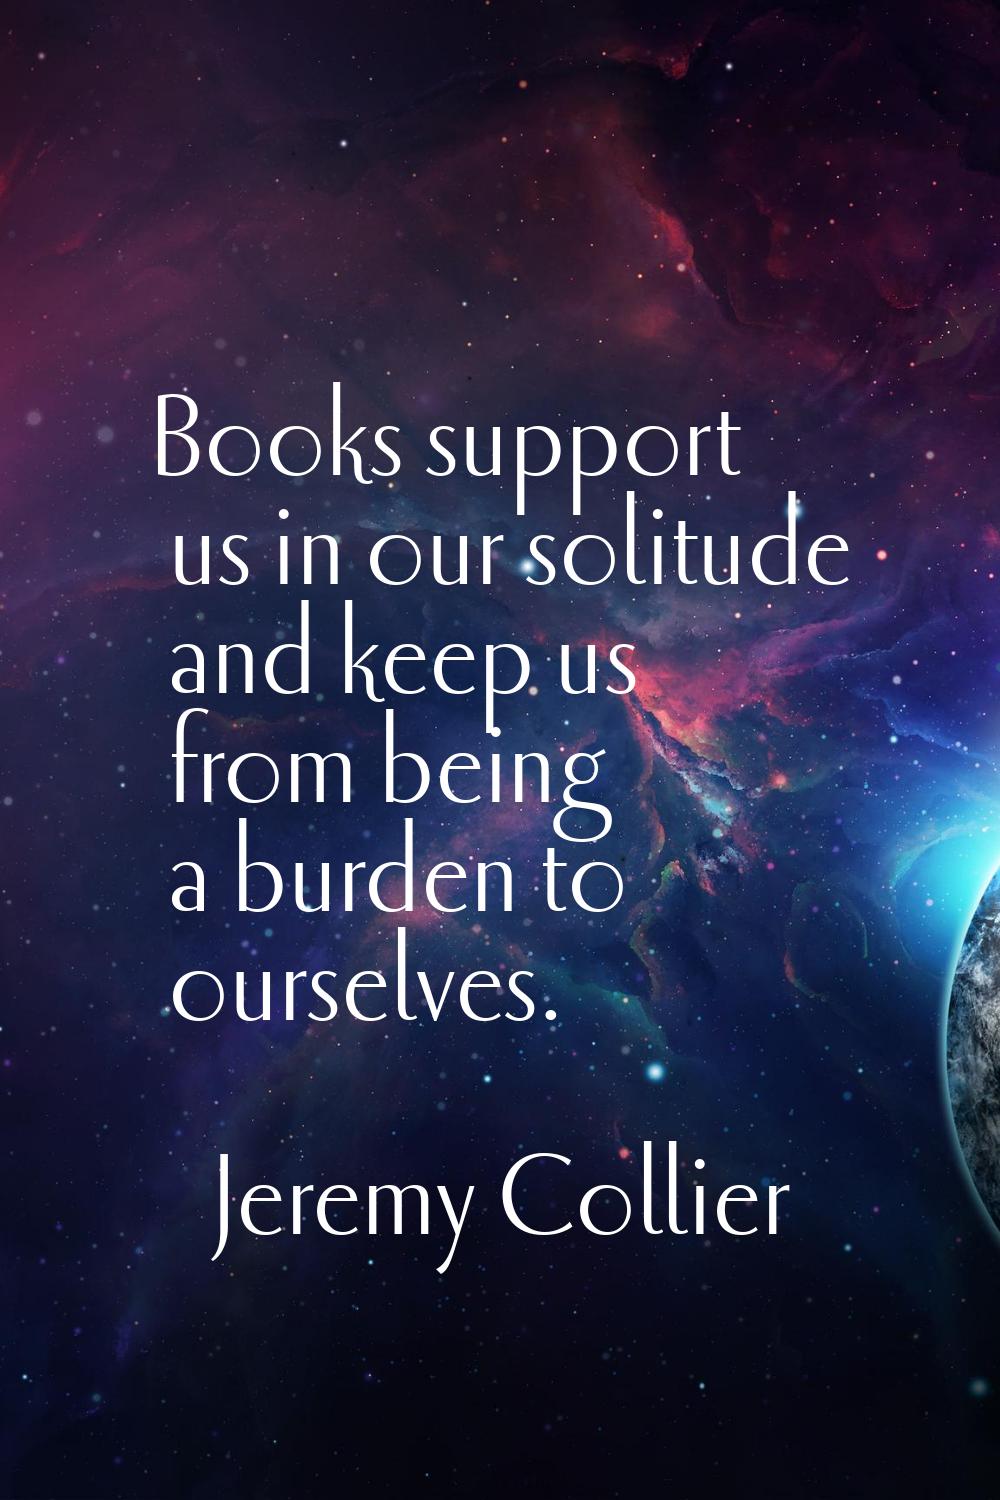 Books support us in our solitude and keep us from being a burden to ourselves.